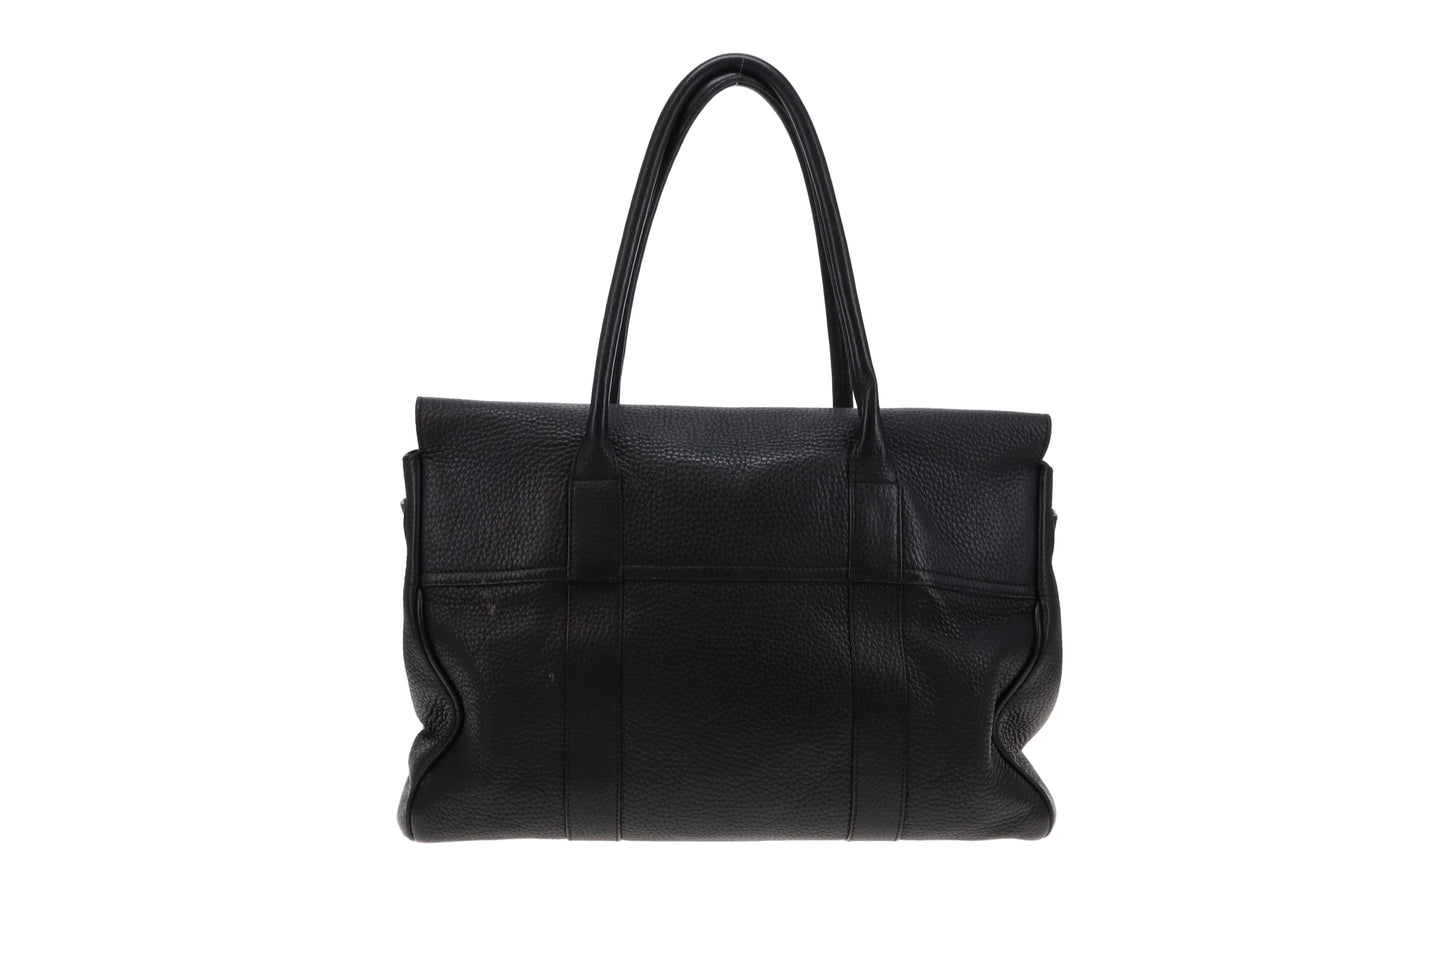 Mulberry Black Leather Classic Bayswater Bag